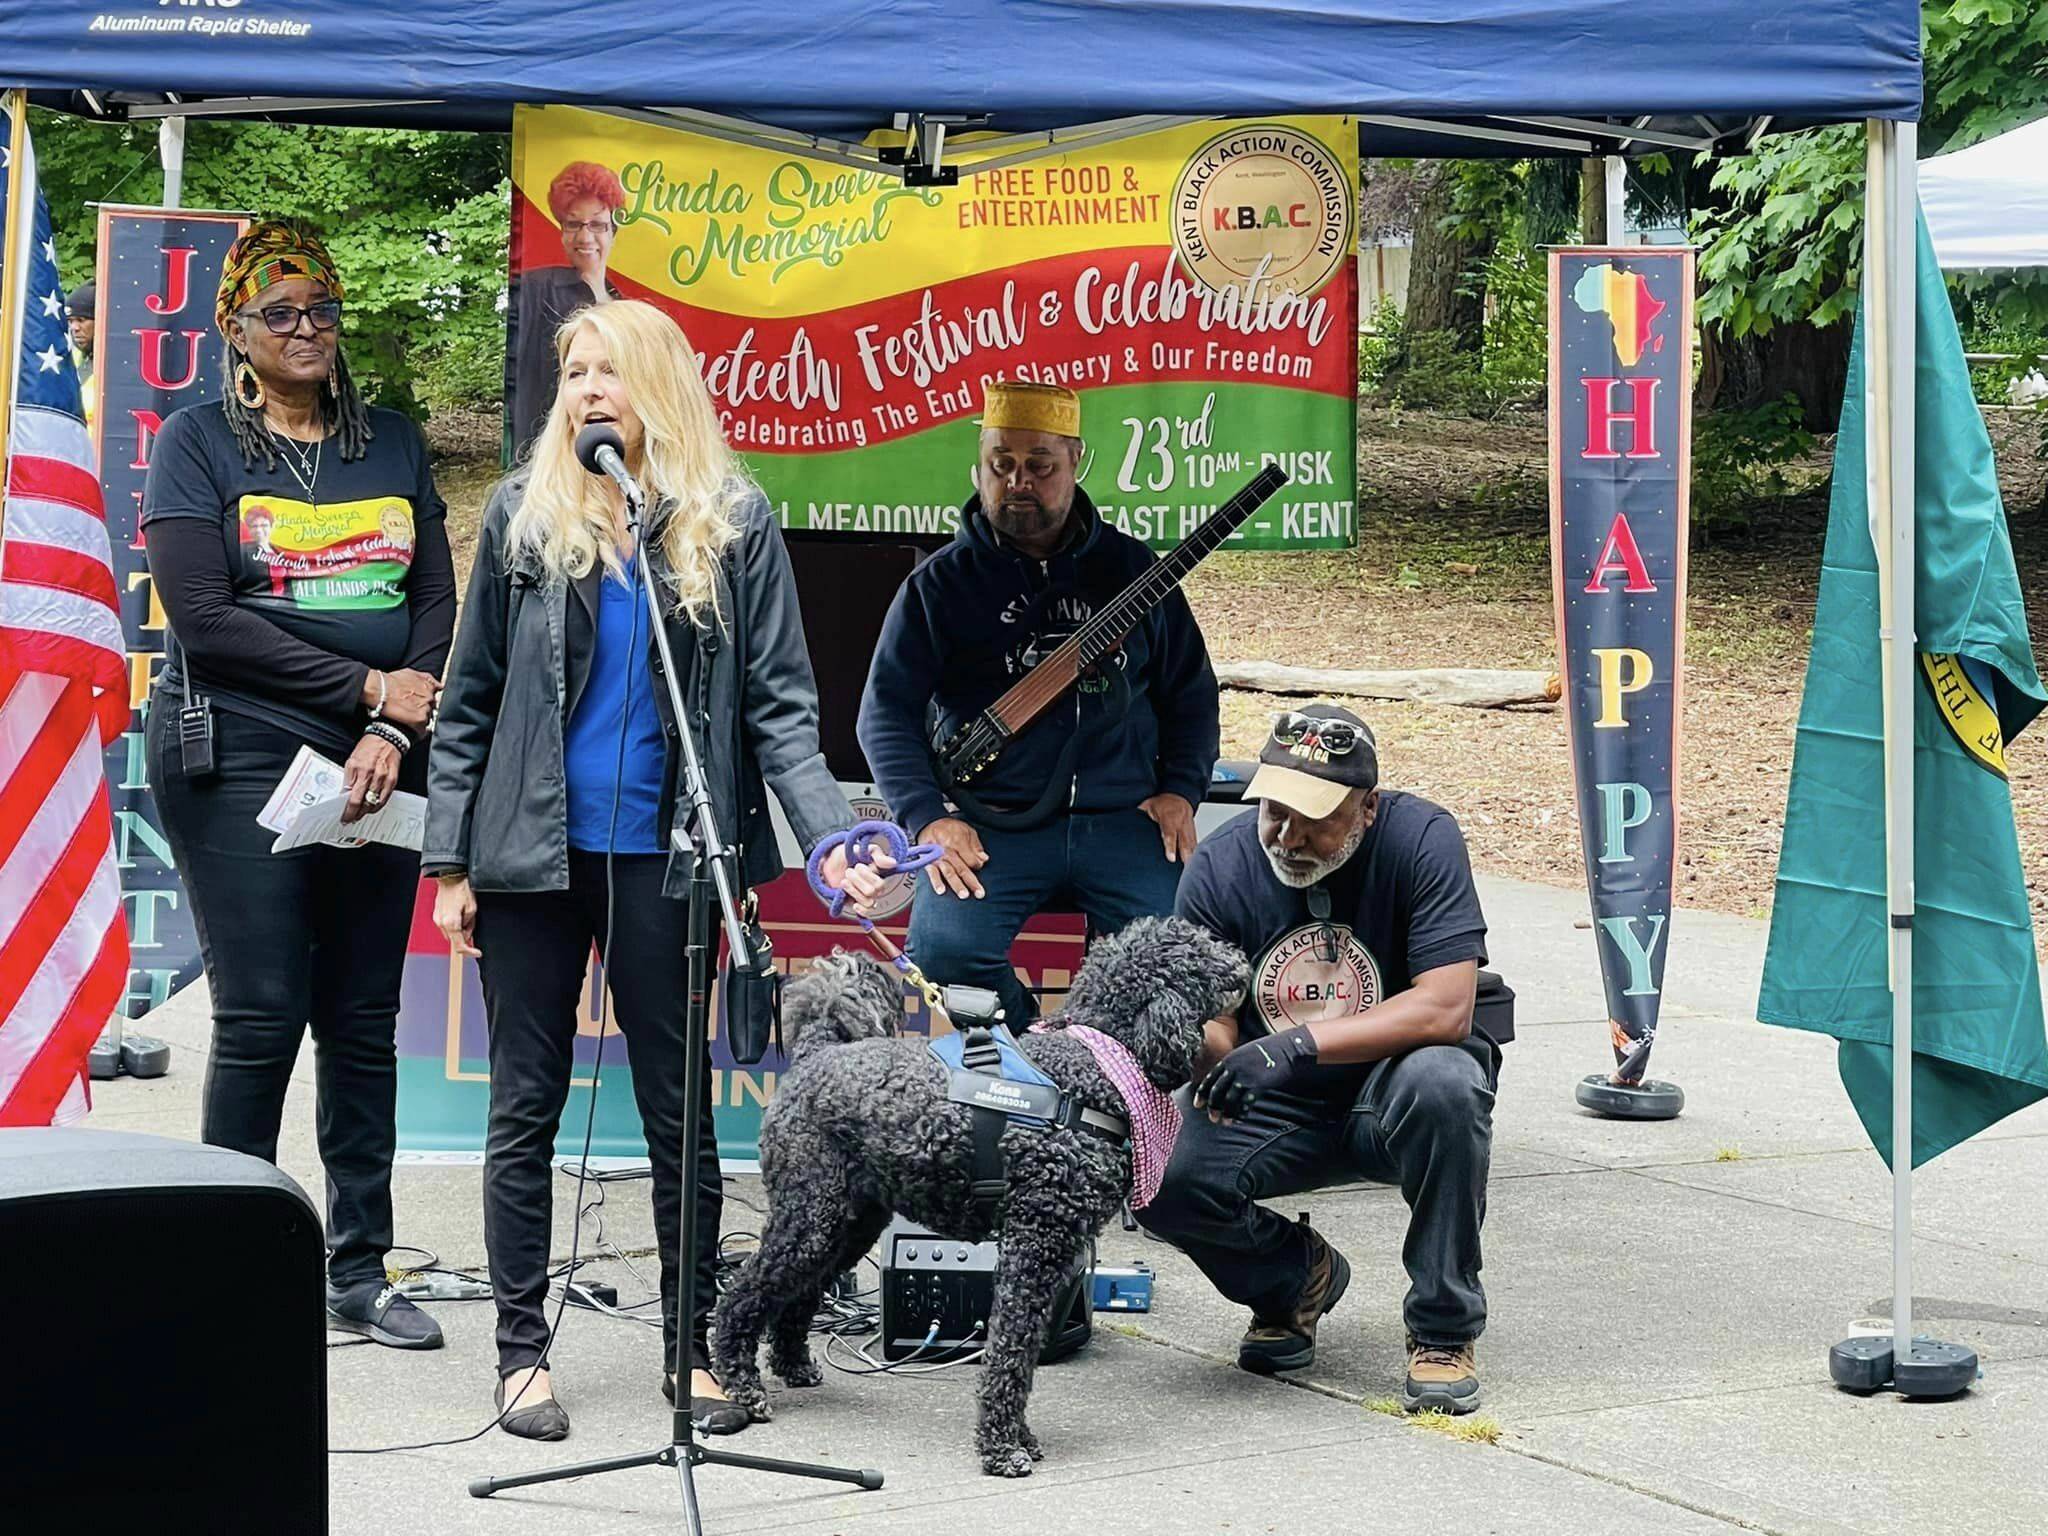 State Rep. Tina Orwall, D-Des Moines, speaks at the 2022 Juneteenth celebration in Kent. This year’s event is June 17 at the Kent YMCA. Behind Orwall from left to right are Gwen Allen-Carston, Michael Powers and Charles Carston. COURTESY PHOTO, Kent Black Action Commission